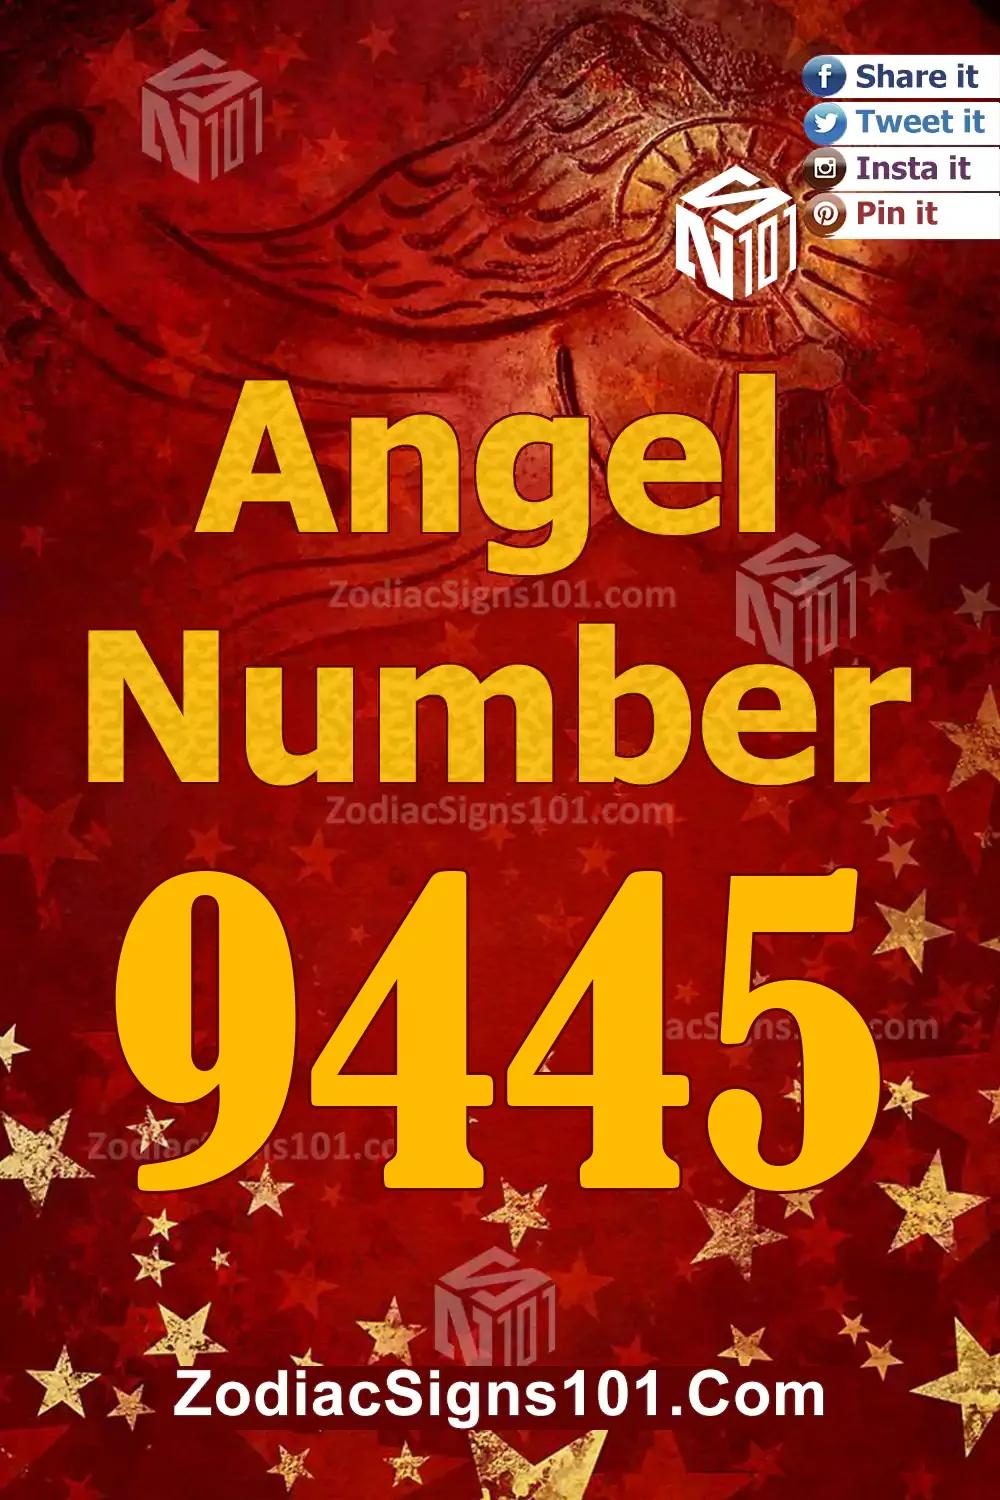 9445 Angel Number Meaning